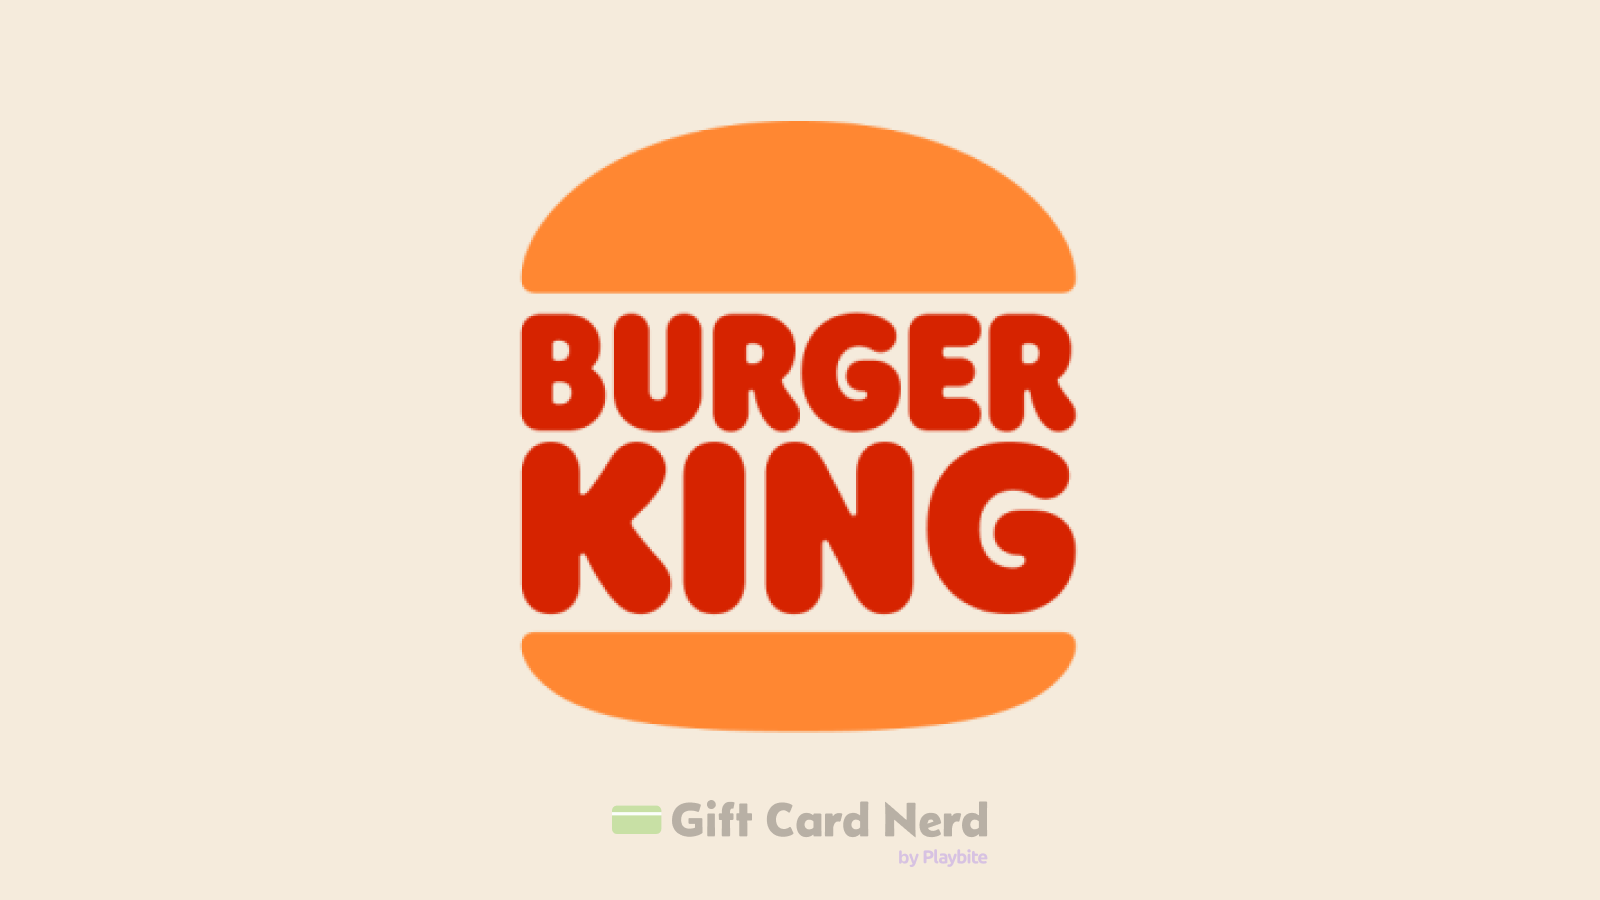 Can You Use a Burger King Gift Card on the Google Play Store?